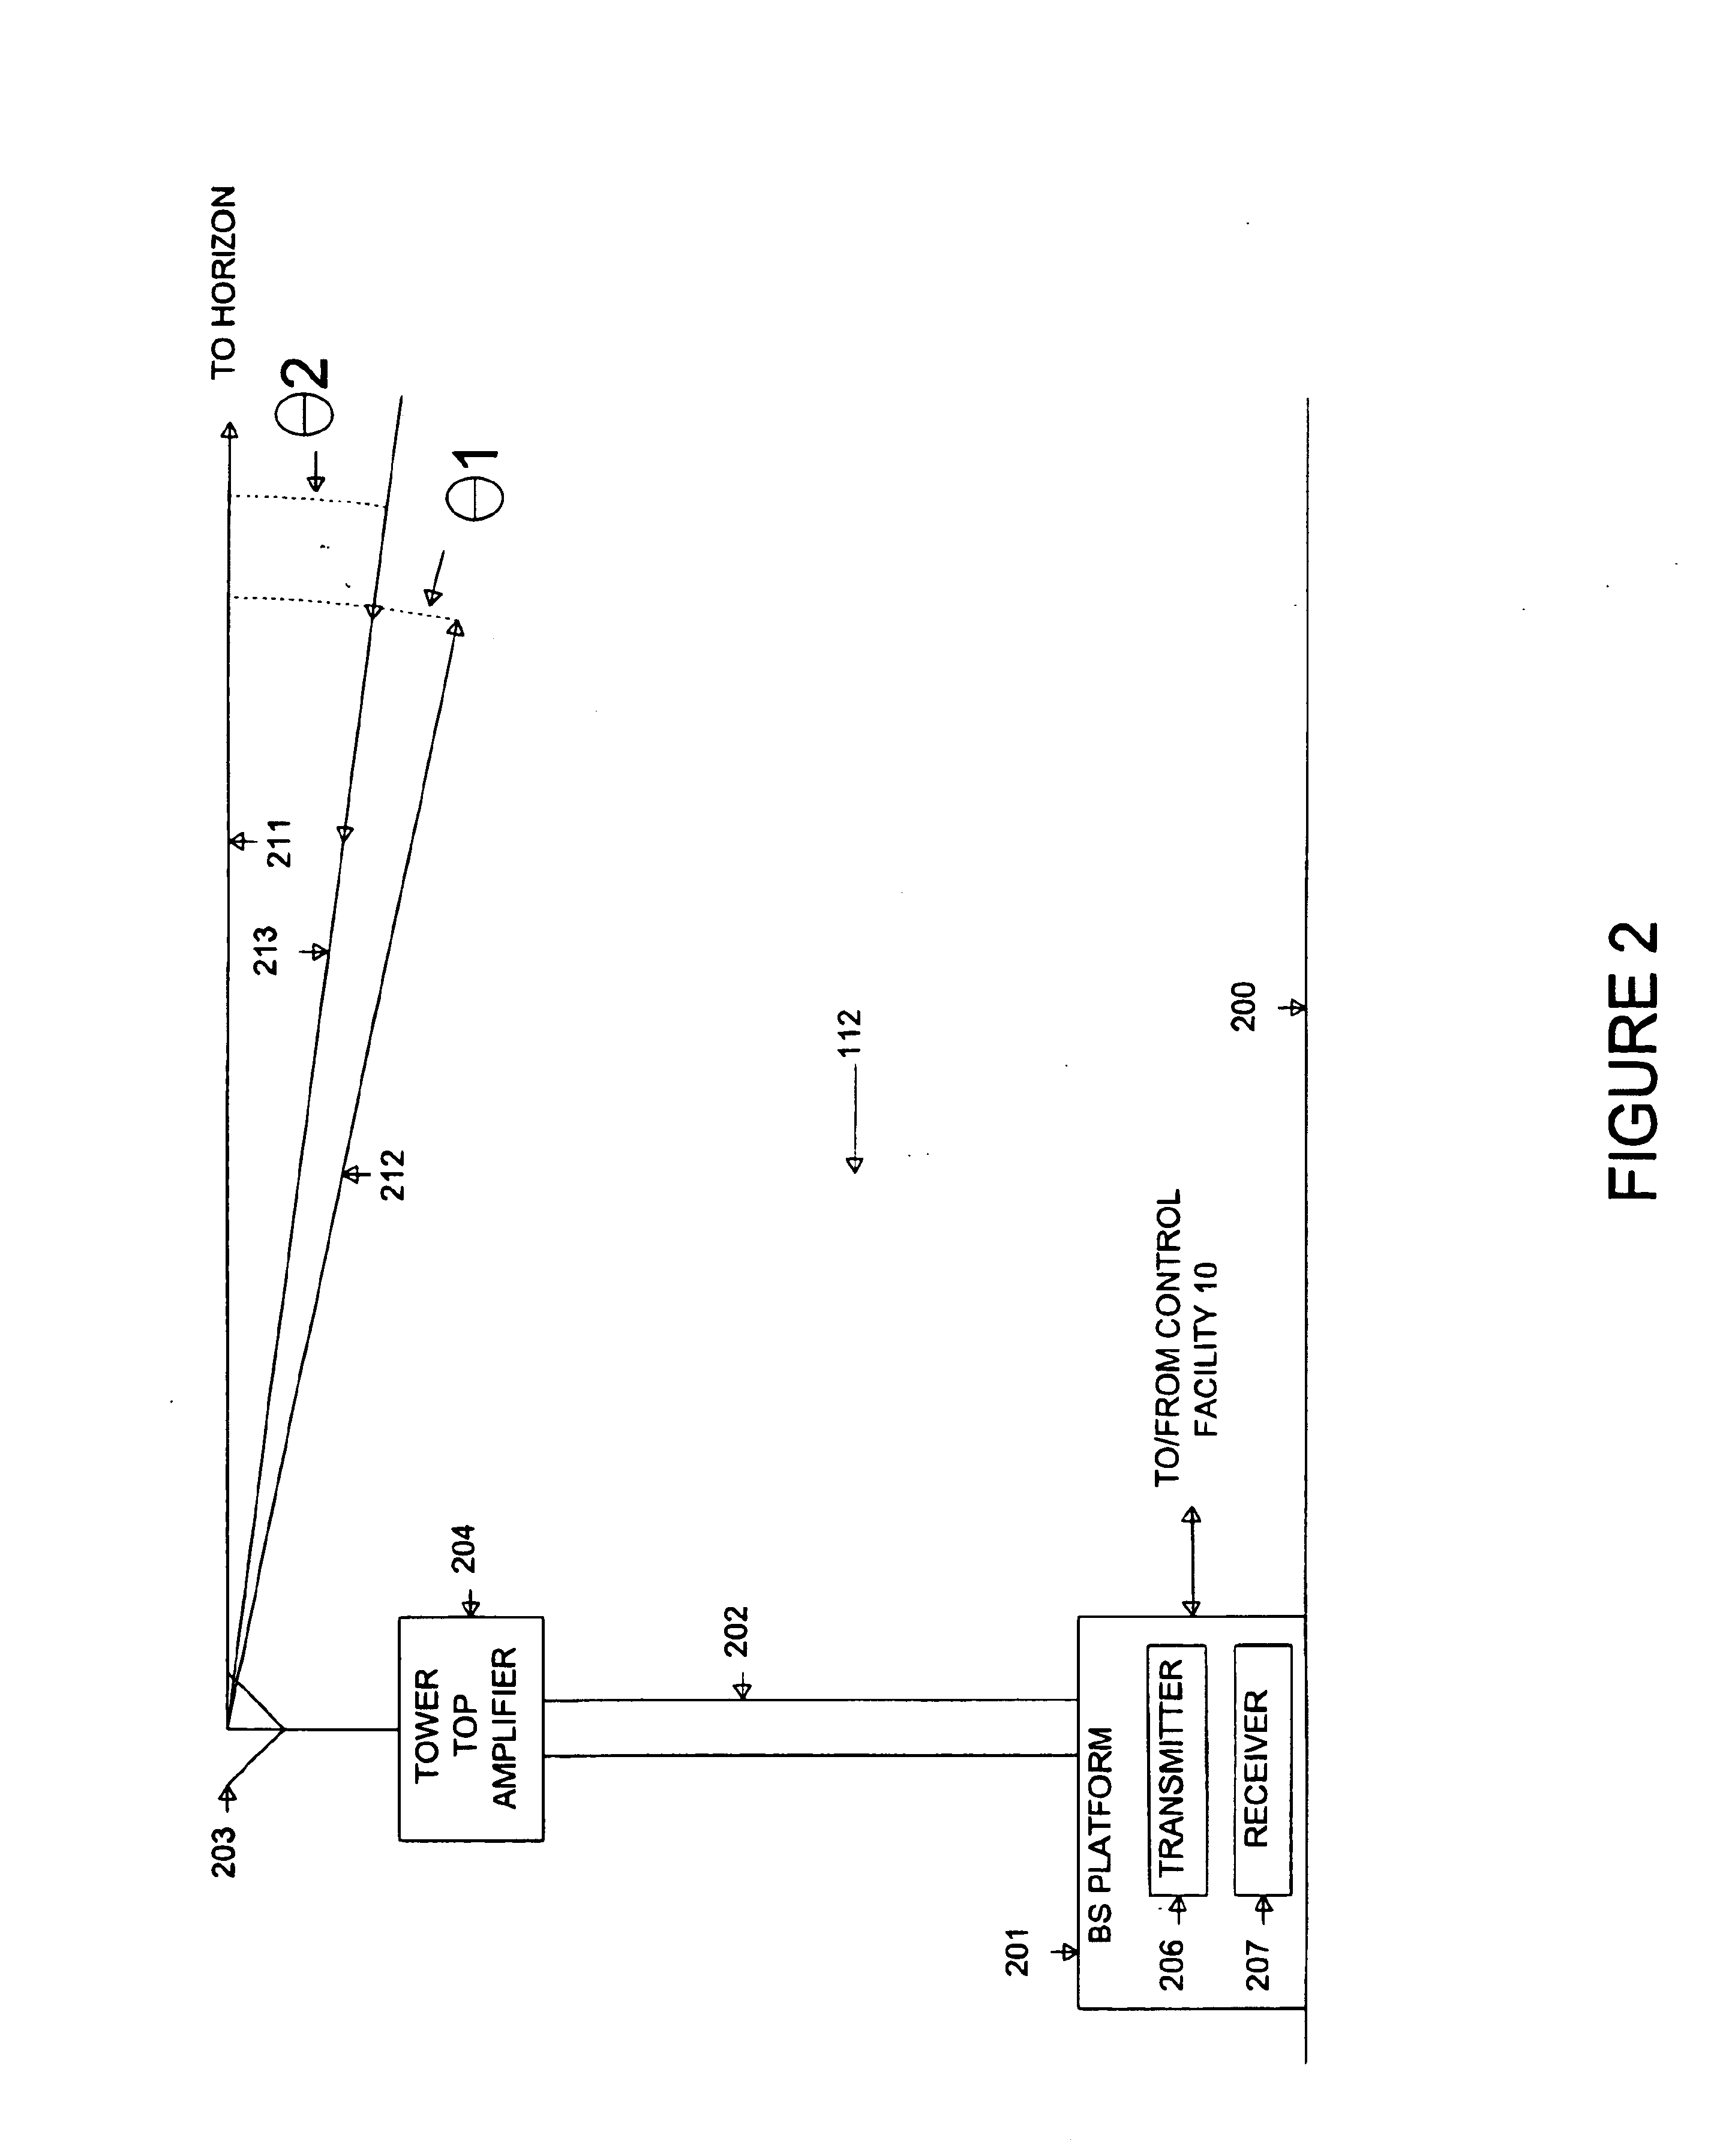 System and method for controlling an end-user application among a plurality of communication units in a wireless messaging network